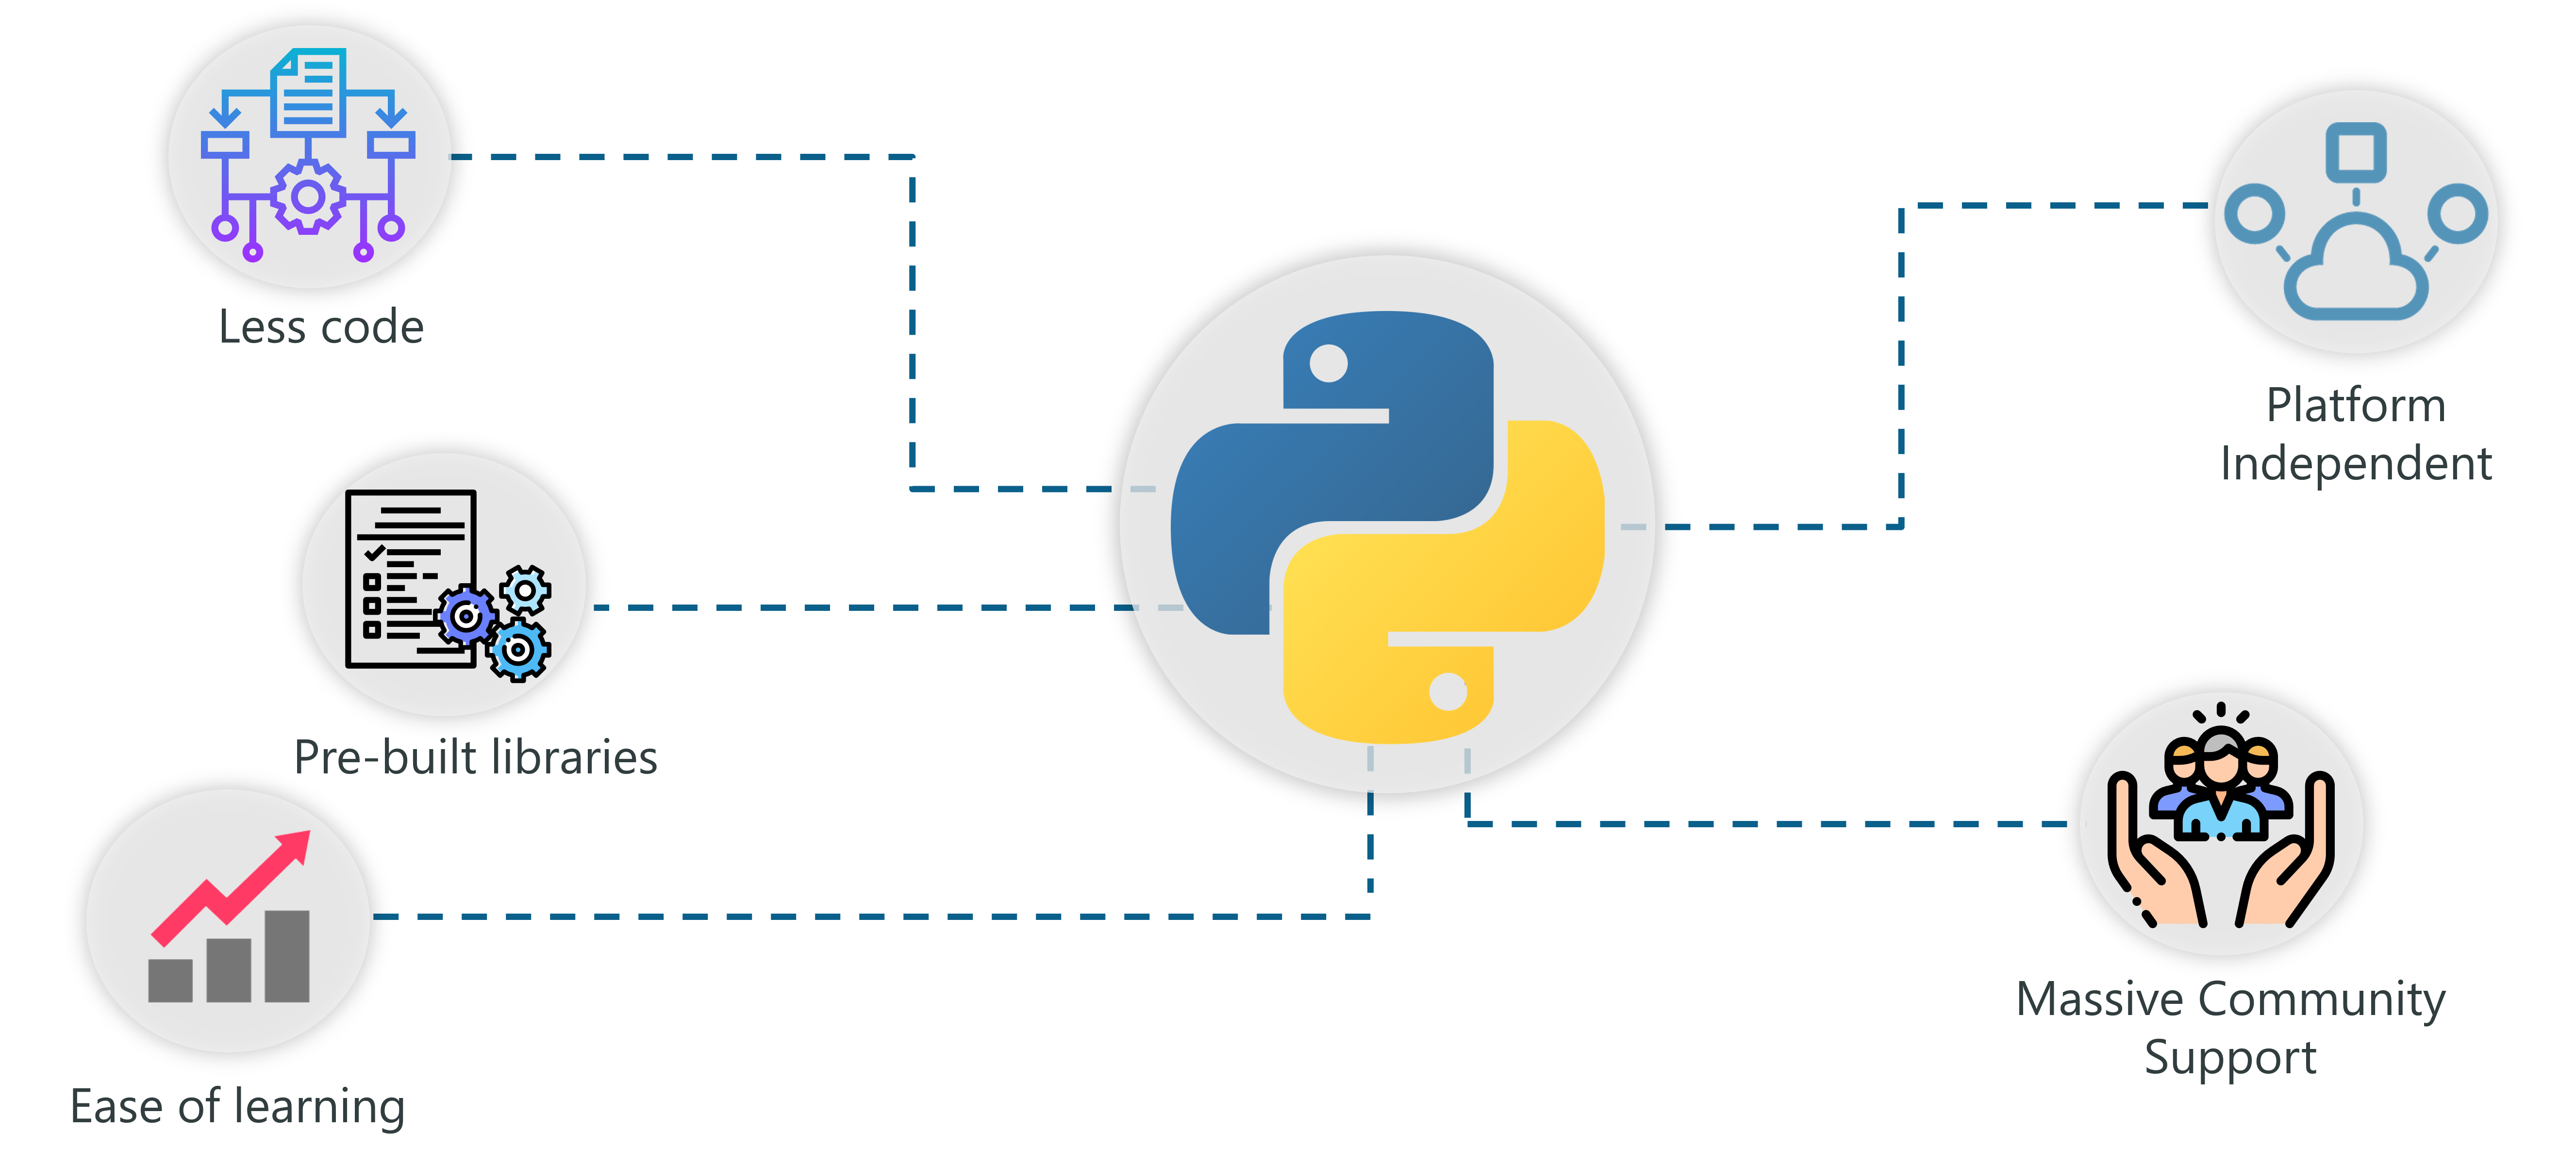 Python AI: How to Build a Neural Network & Make Predictions – Real